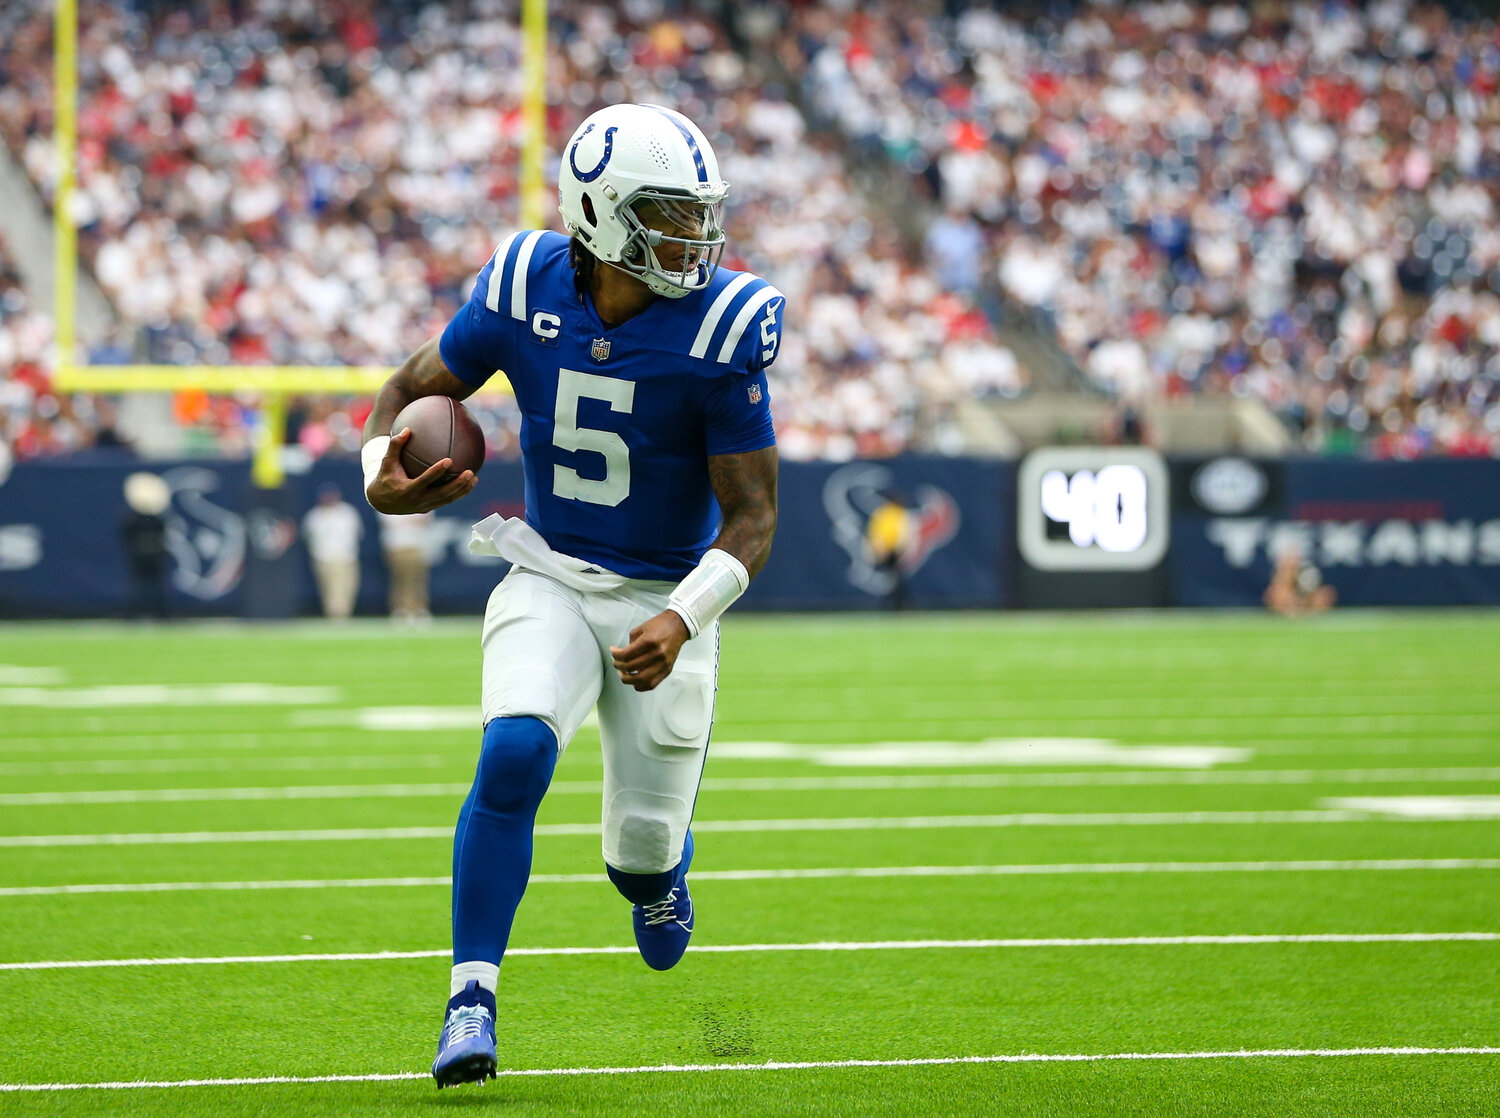 Colts quarterback Anthony Richardson (5) scores on a 15-yard touchdown run during an NFL game between the Texans and the Colts on September 17, 2023 in Houston. The Colts won, 31-20.